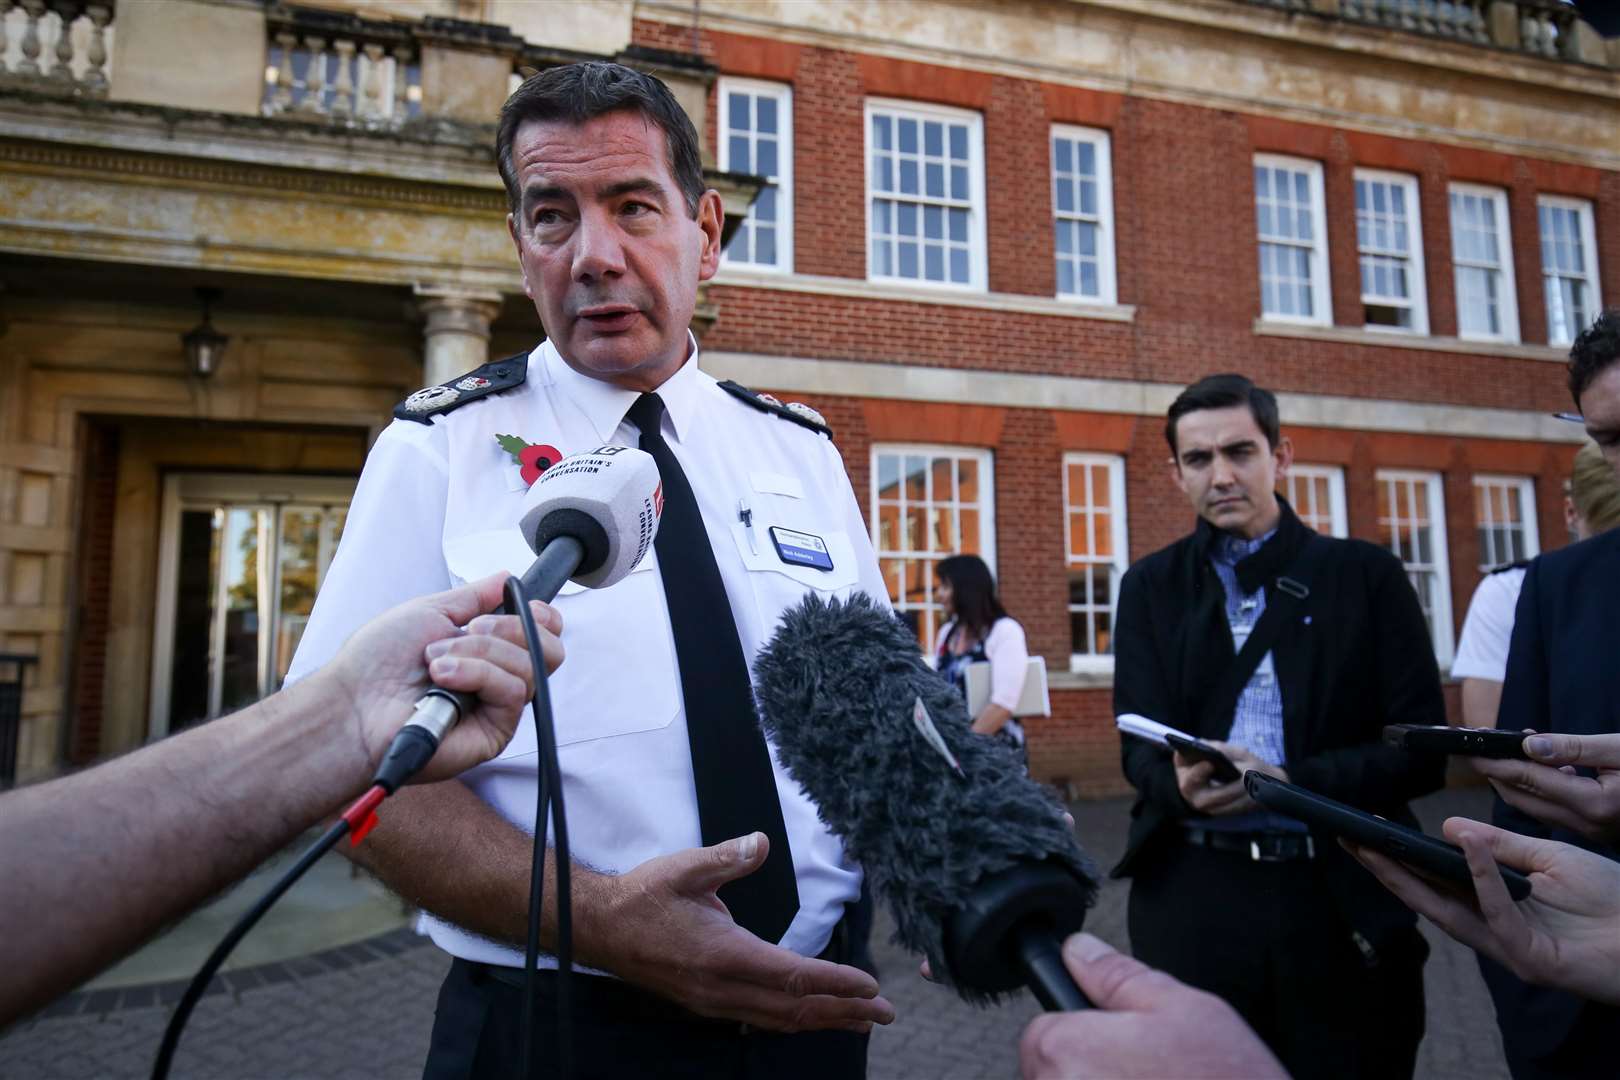 Adderley speaking outside Northamptonshire Police HQ at Wootton Hall Park, Northampton about the death of Harry Dunn in August 2019 (Jacob King/PA)